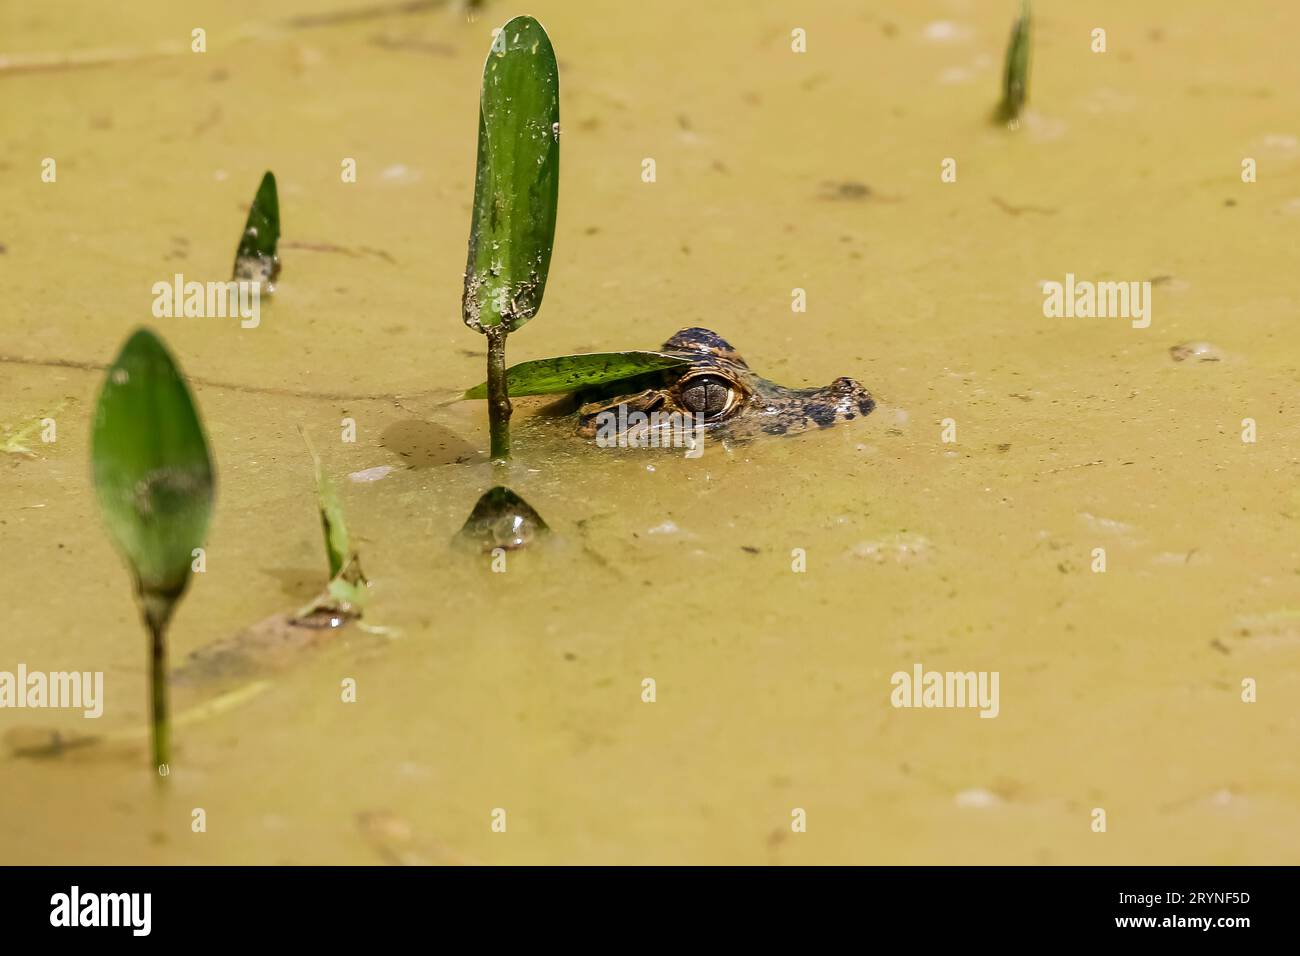 Head of a small Yacare caiman on surface of a muddy river with some green plants, Pantanal Wetlands, Stock Photo